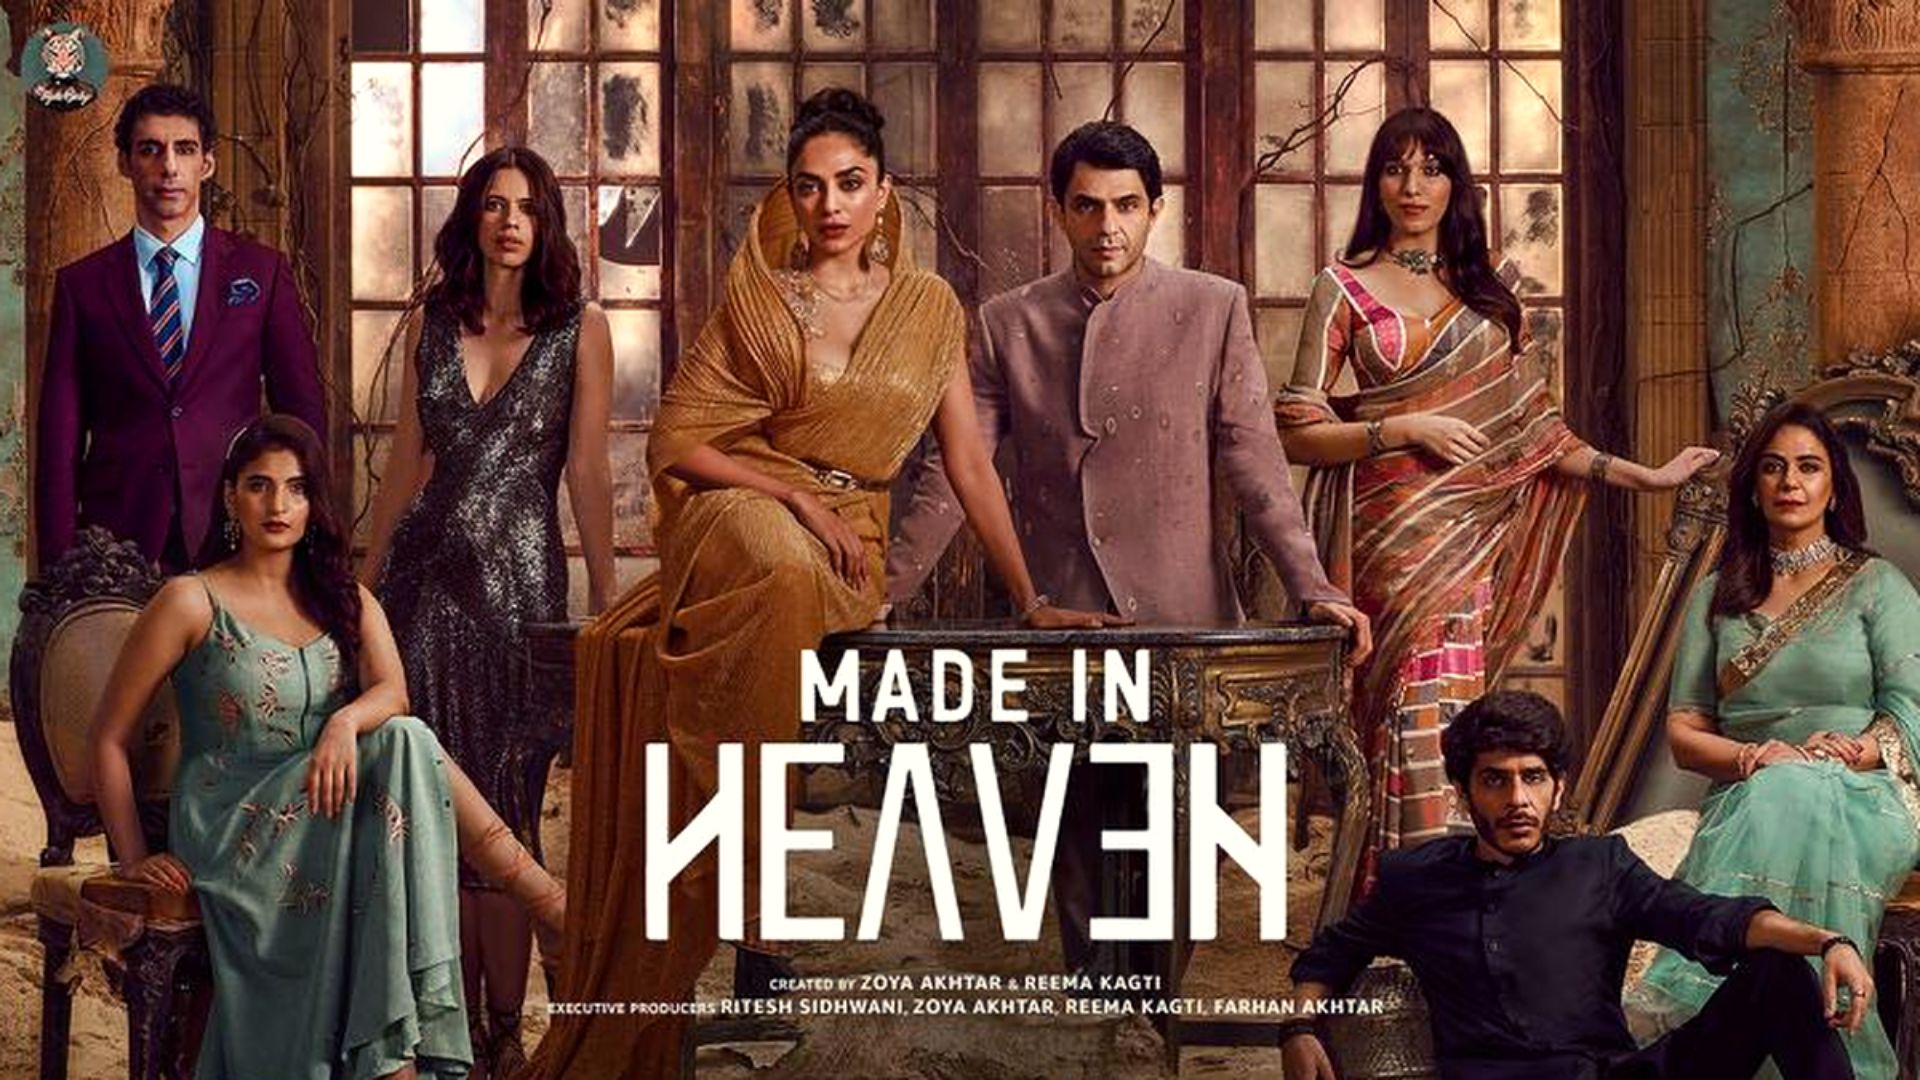 How To Watch Made In Heaven Season 2 Web Series For Free?